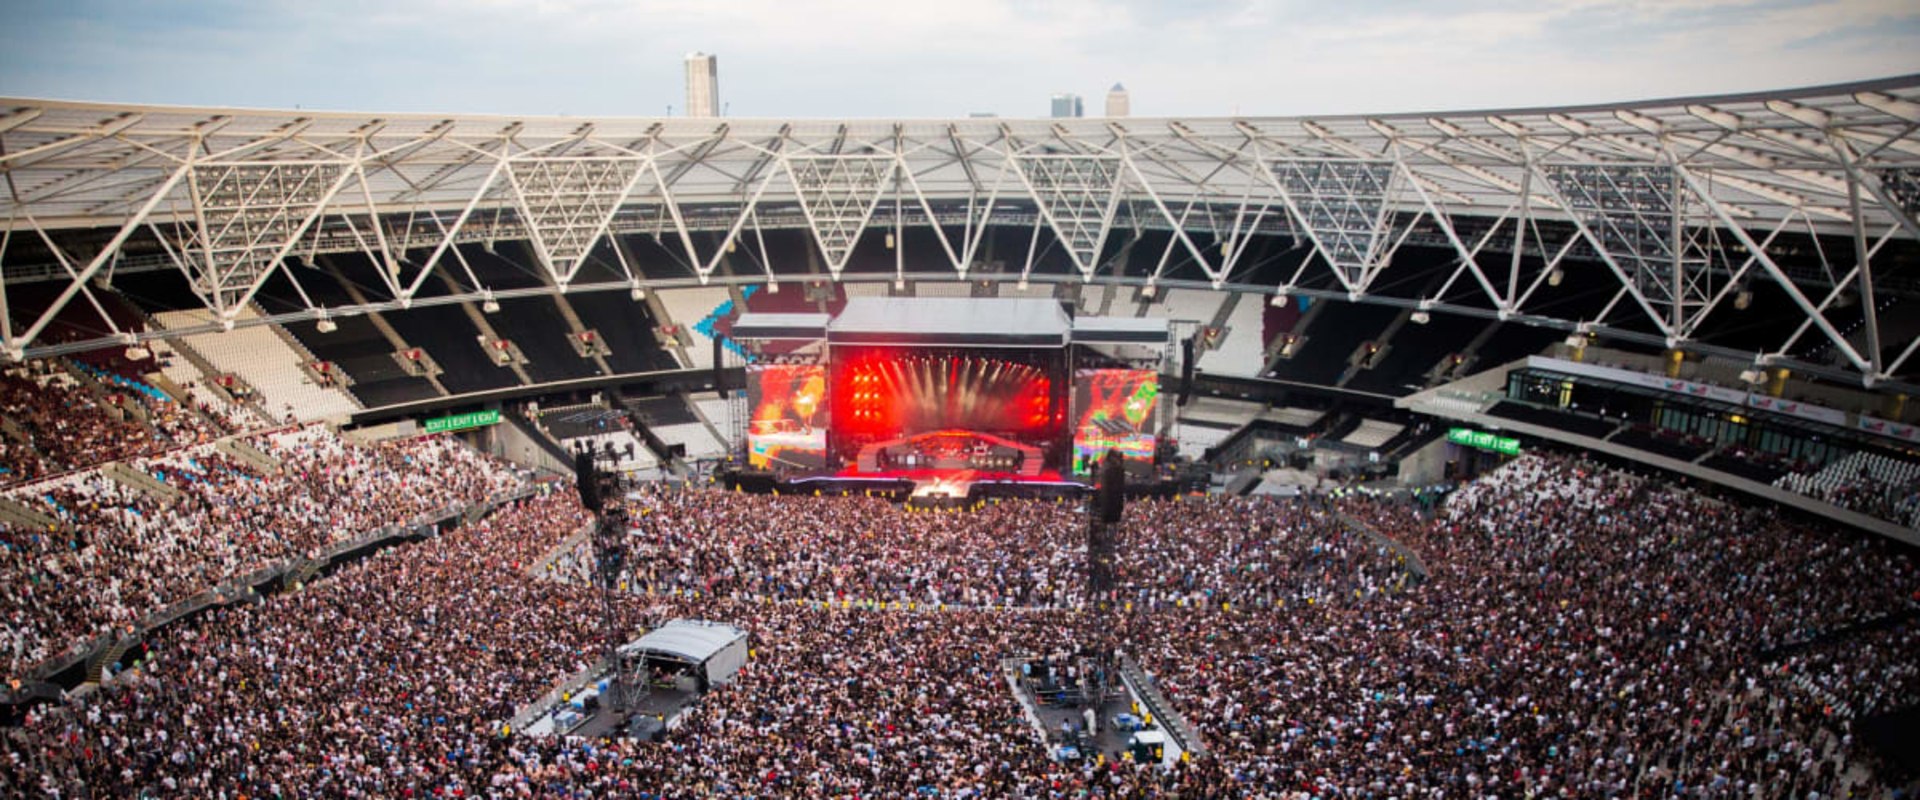 Lost or Stolen Items at London Stadium Events: What You Need to Know